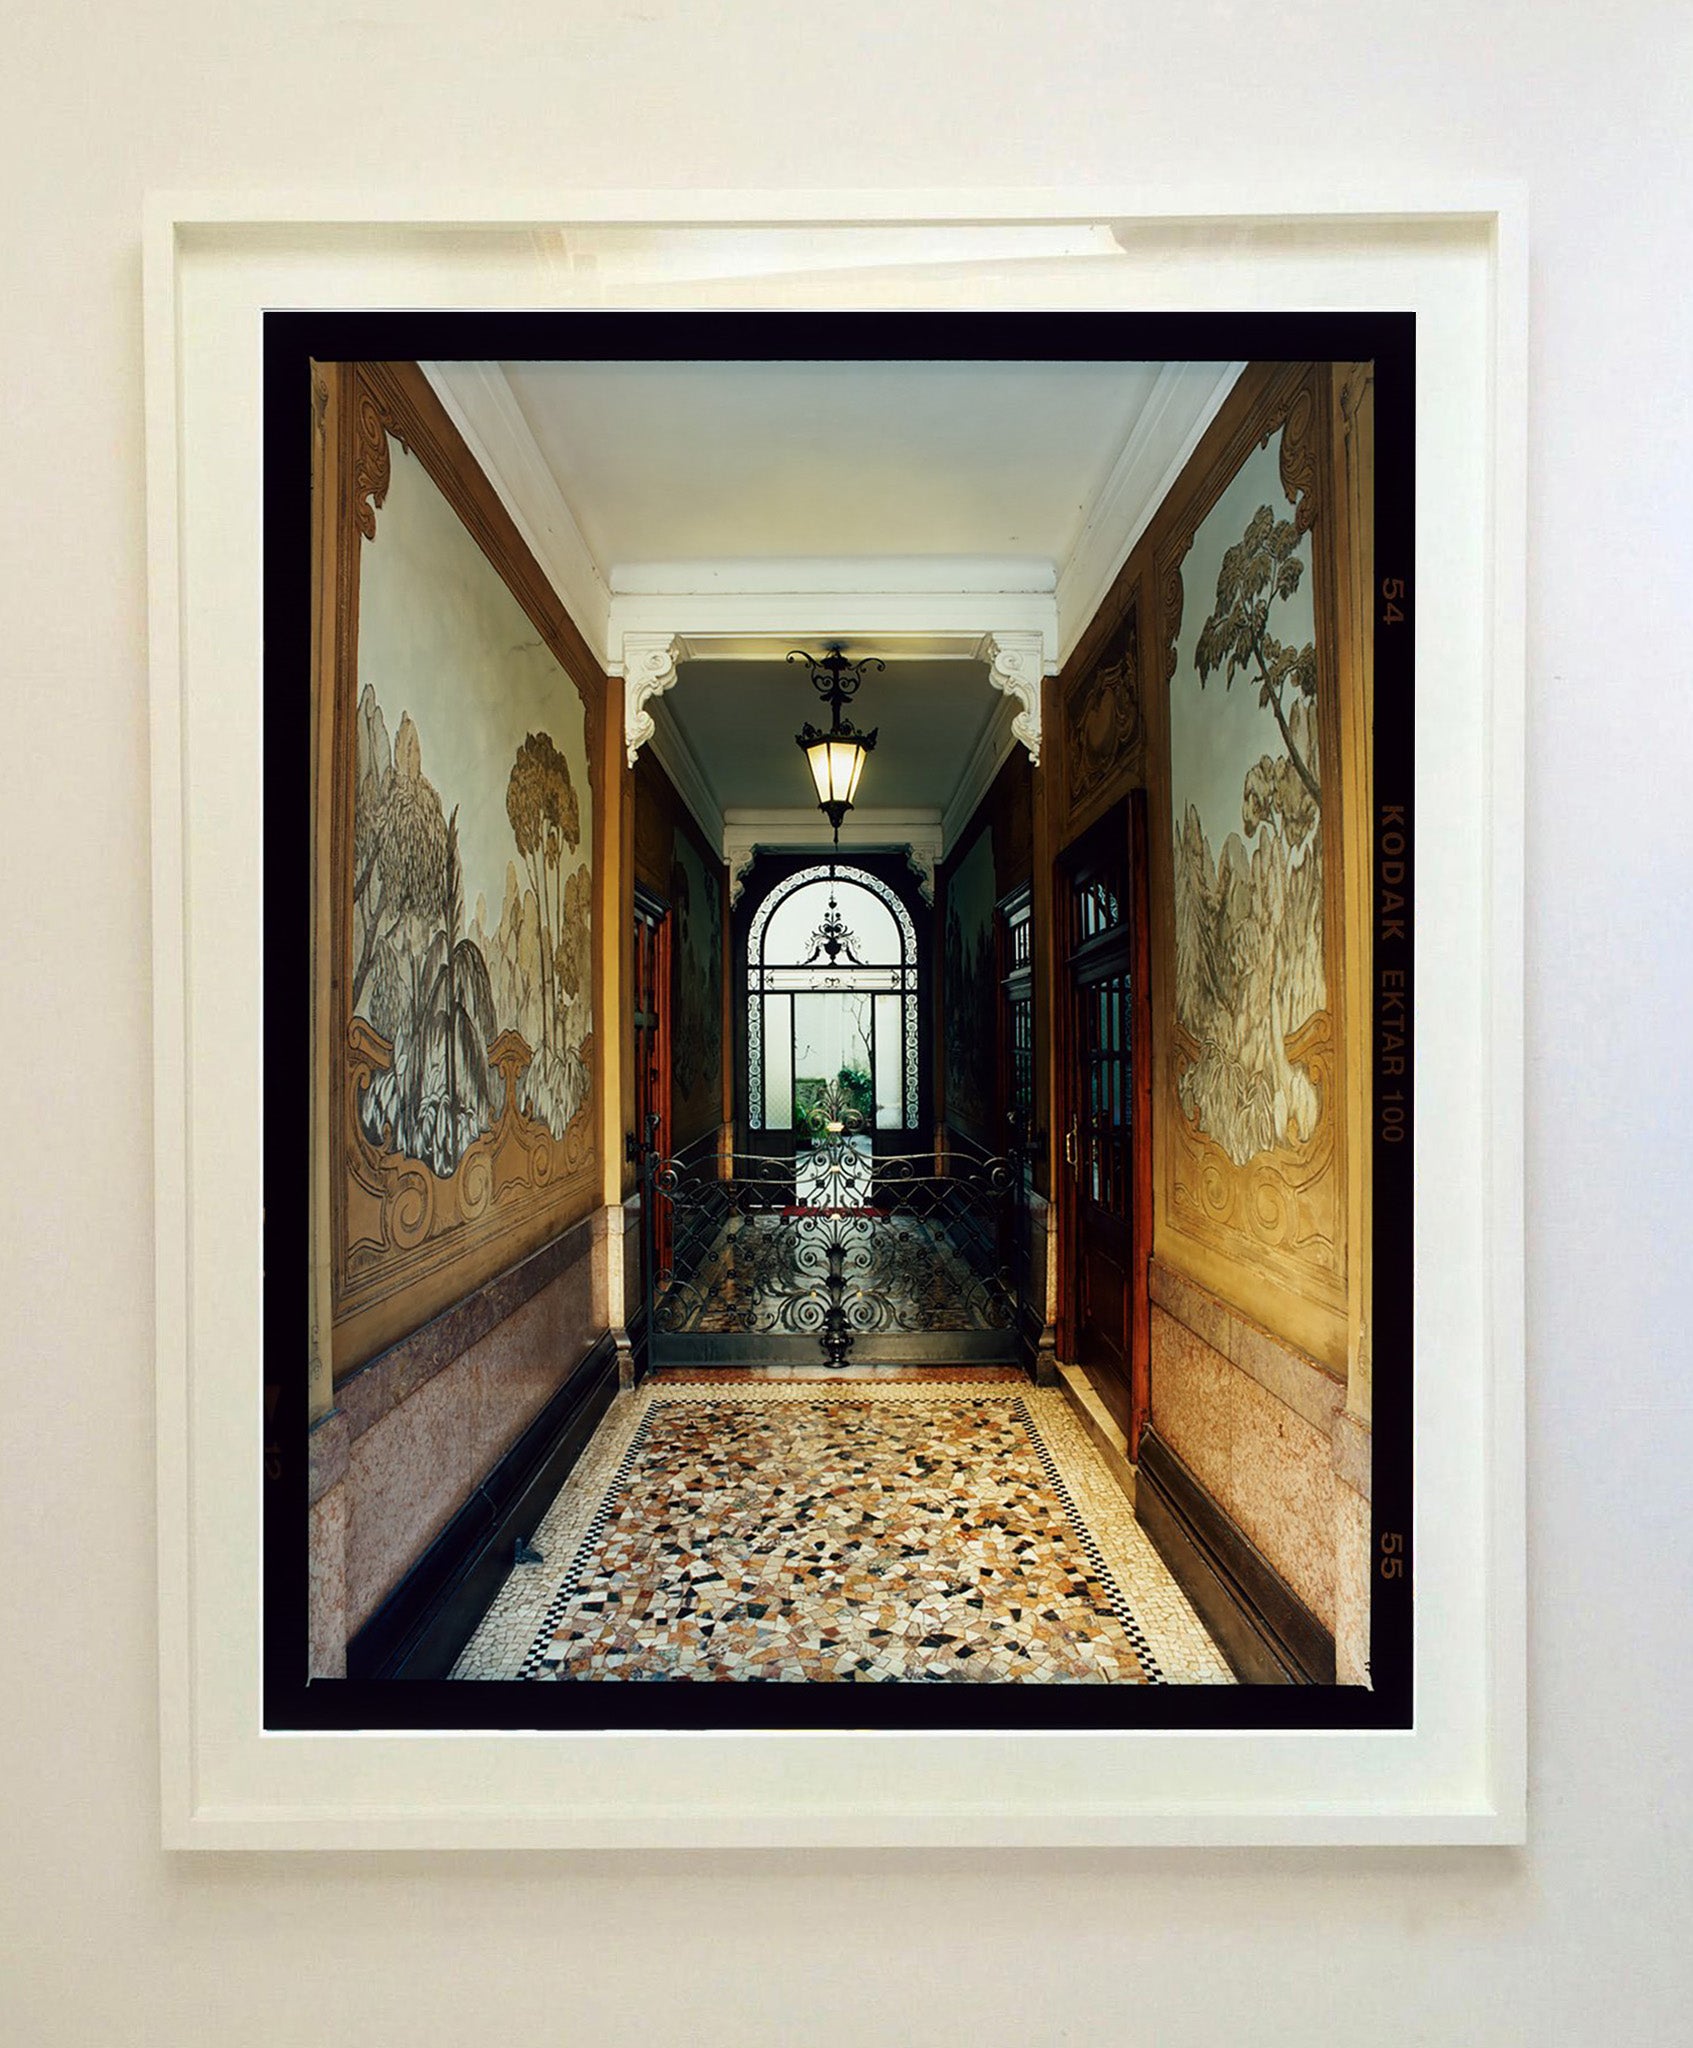 'Foyer VI' is an Art Deco entrance hall in Milan, featuring stained glass panelling and marble flooring. This piece is part of Richard Heeps' series 'A Short History of Milan' which began in November 2018 for a special project featuring at the Affordable Art Fair Milan 2019, and the series is ongoing. There is a reoccurring linear, structural theme throughout the series, capturing the Milanese use of materials in design such as glass, metal, wood and stone. 